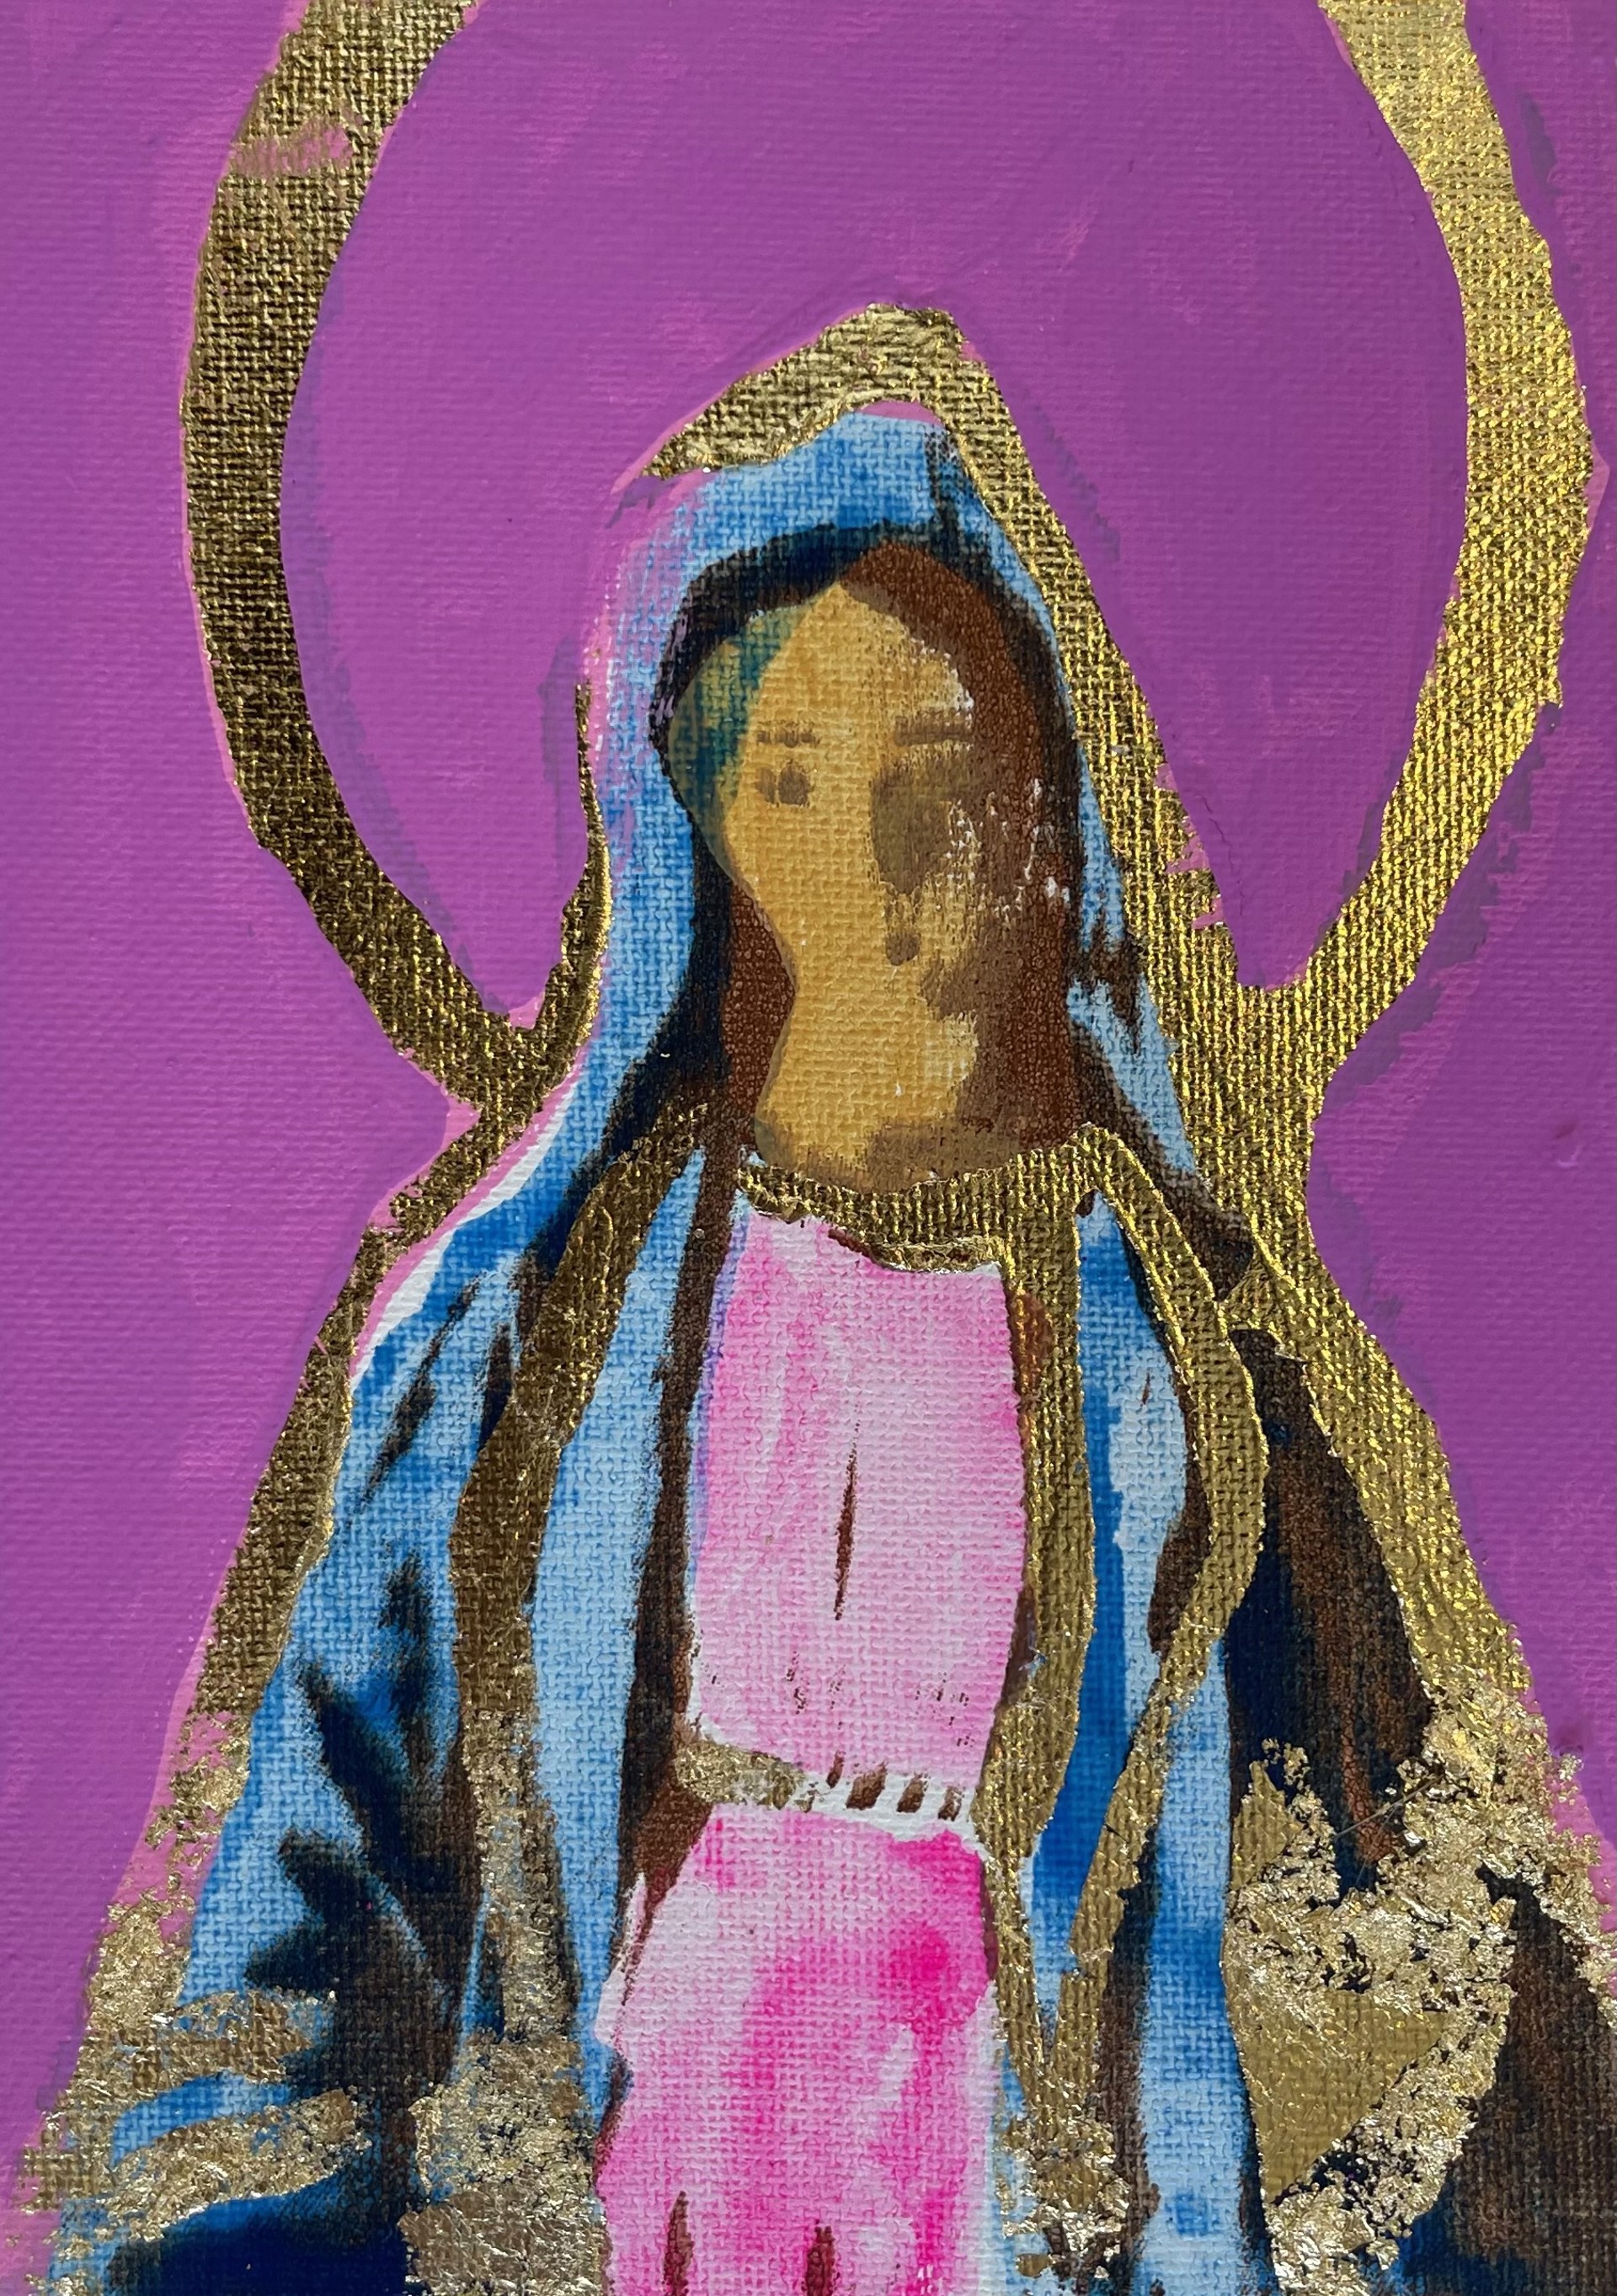 Hail Mary 5 by Megan Coonelly